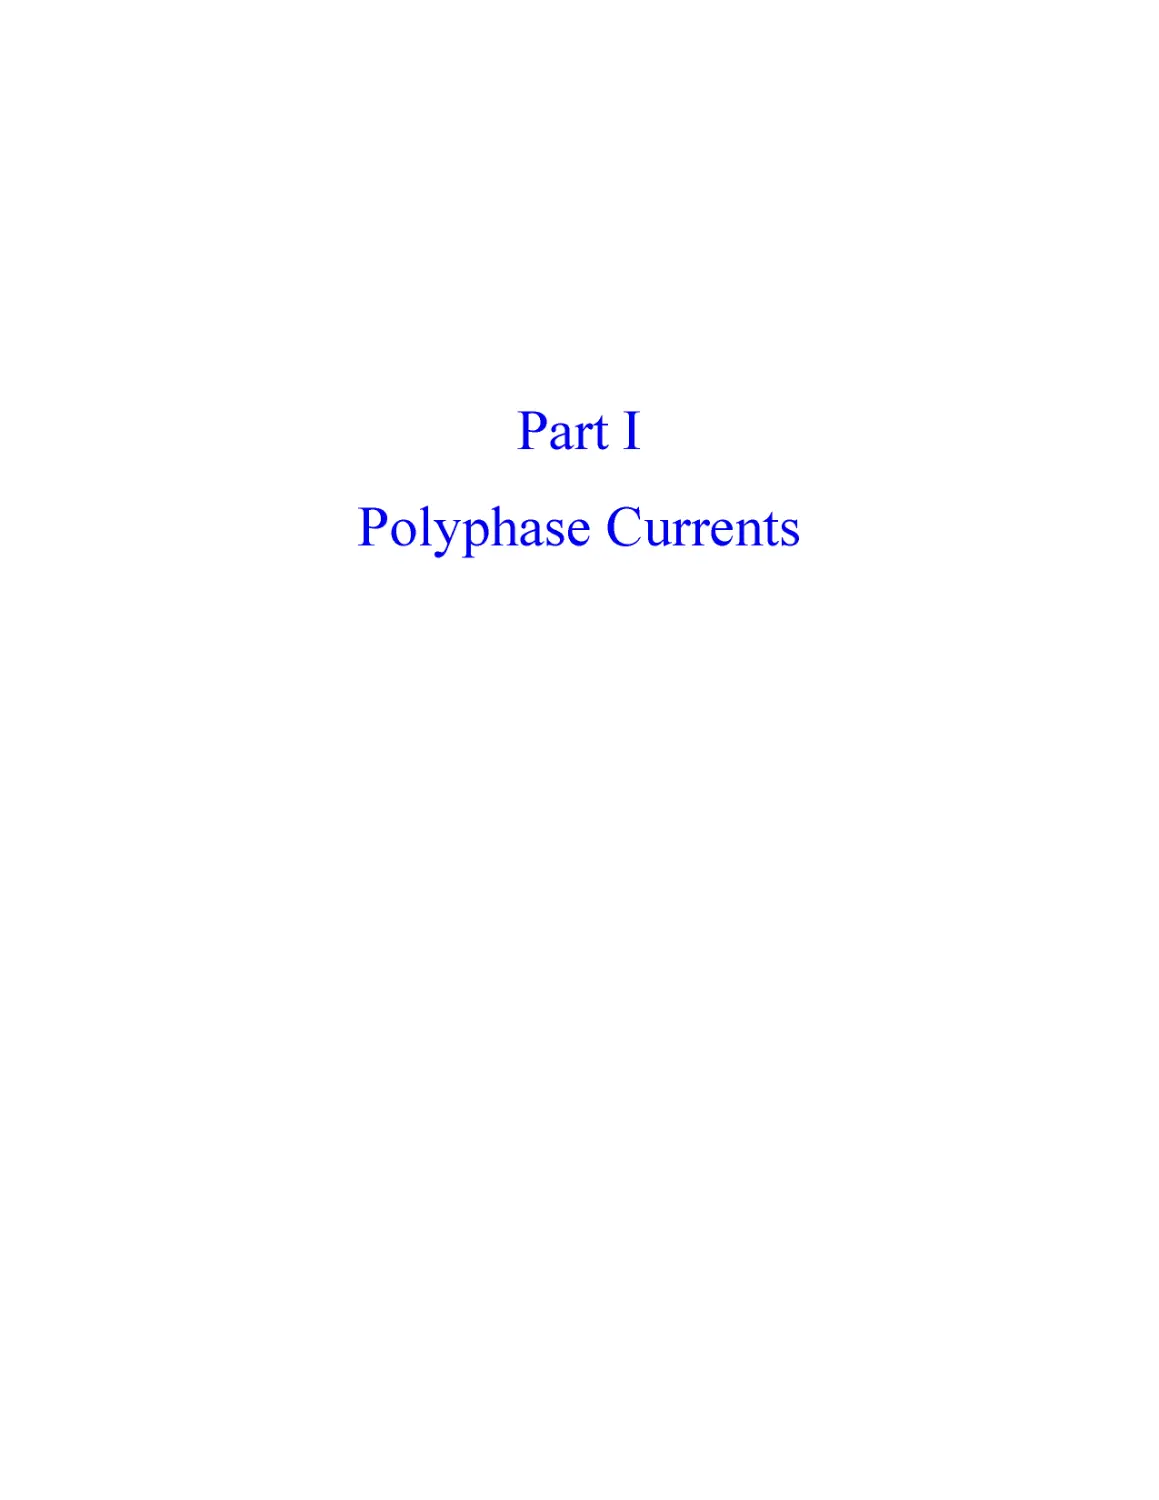 ﻿Part I: Polyphase Current